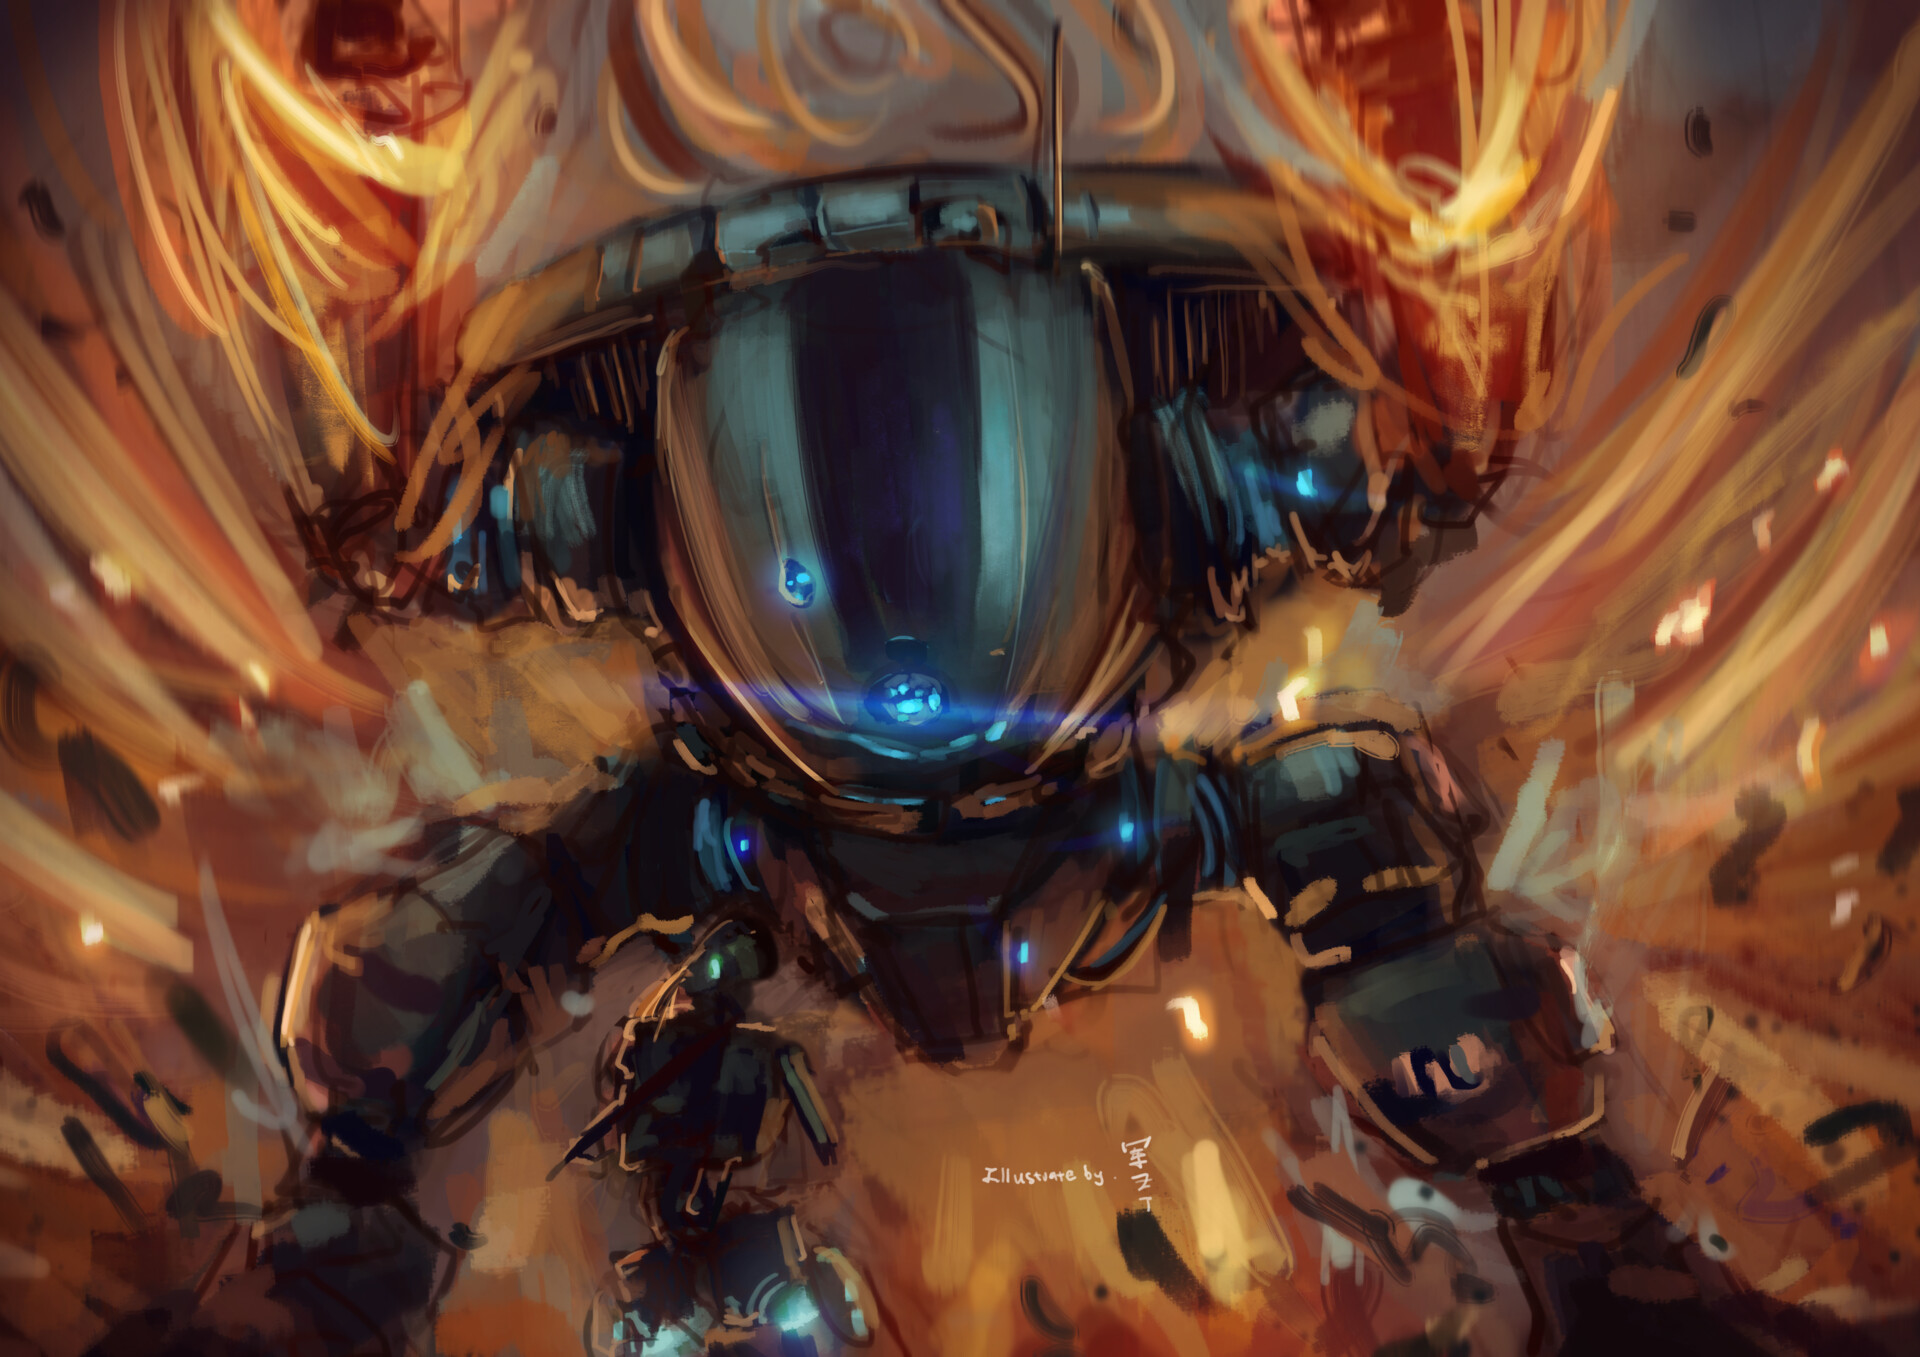 Fan art of scorch of titanfall 2; respawn entertainment.